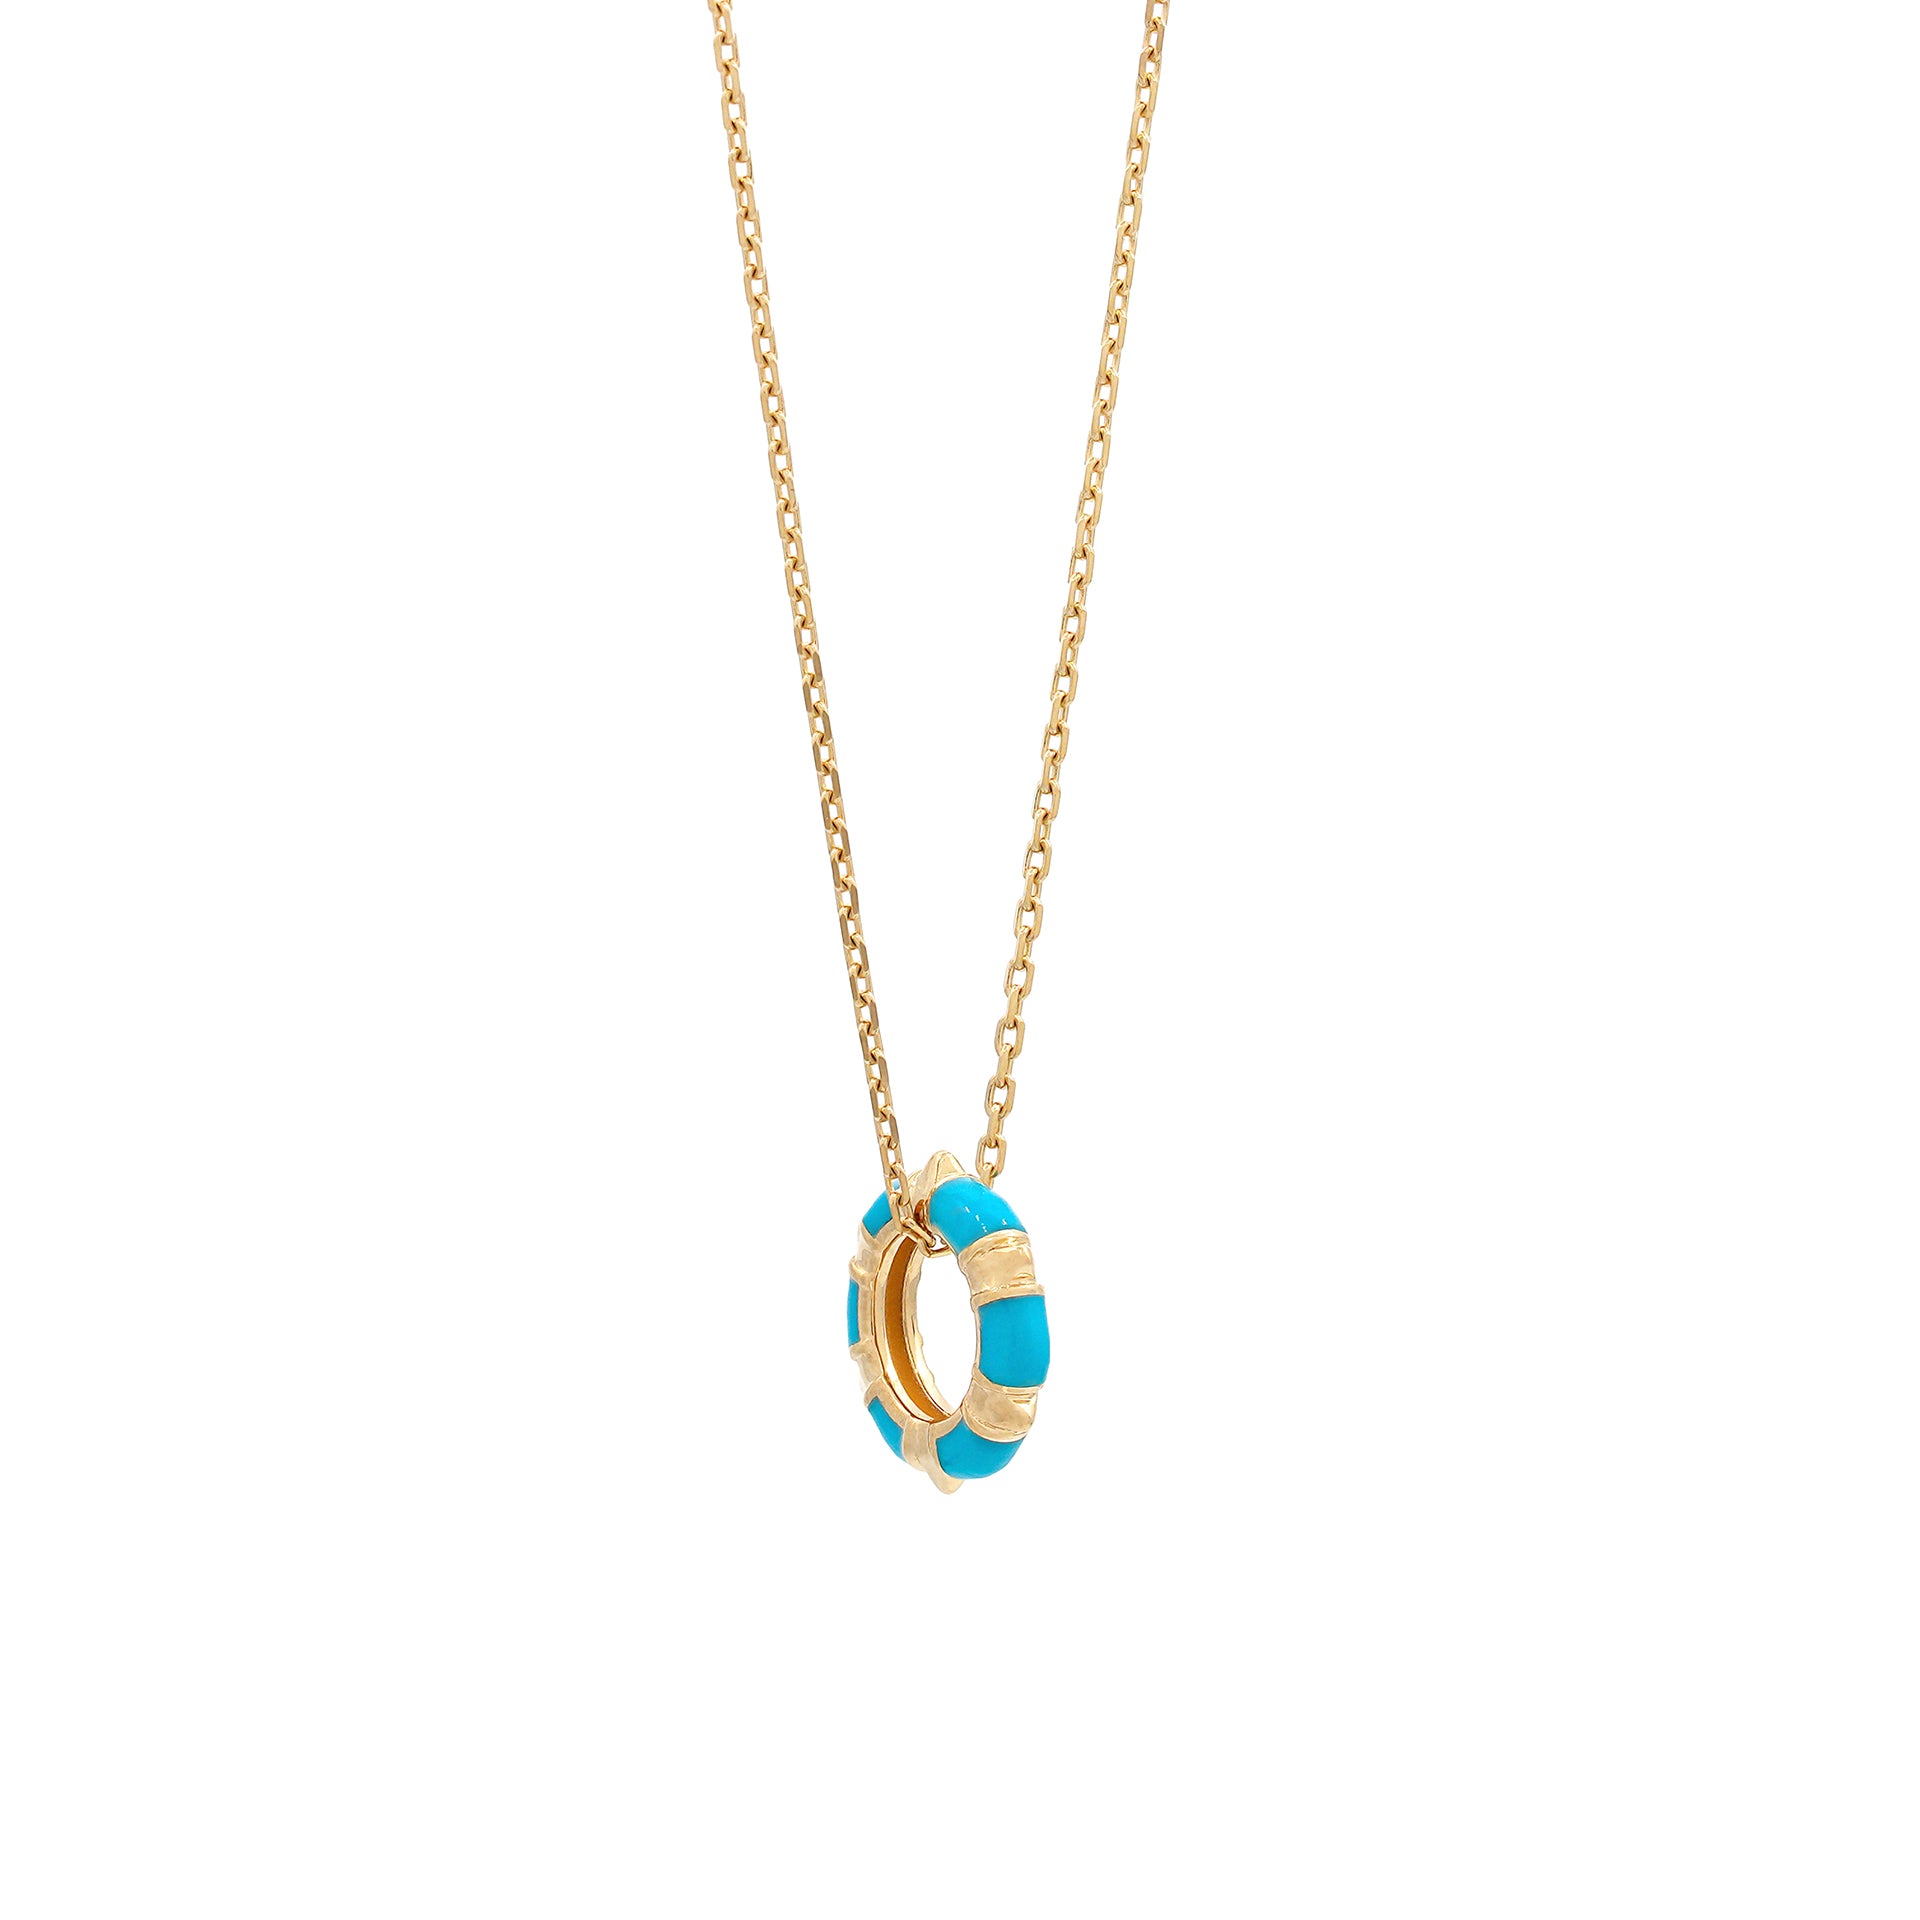 Summer Hues Necklace in Turquoise